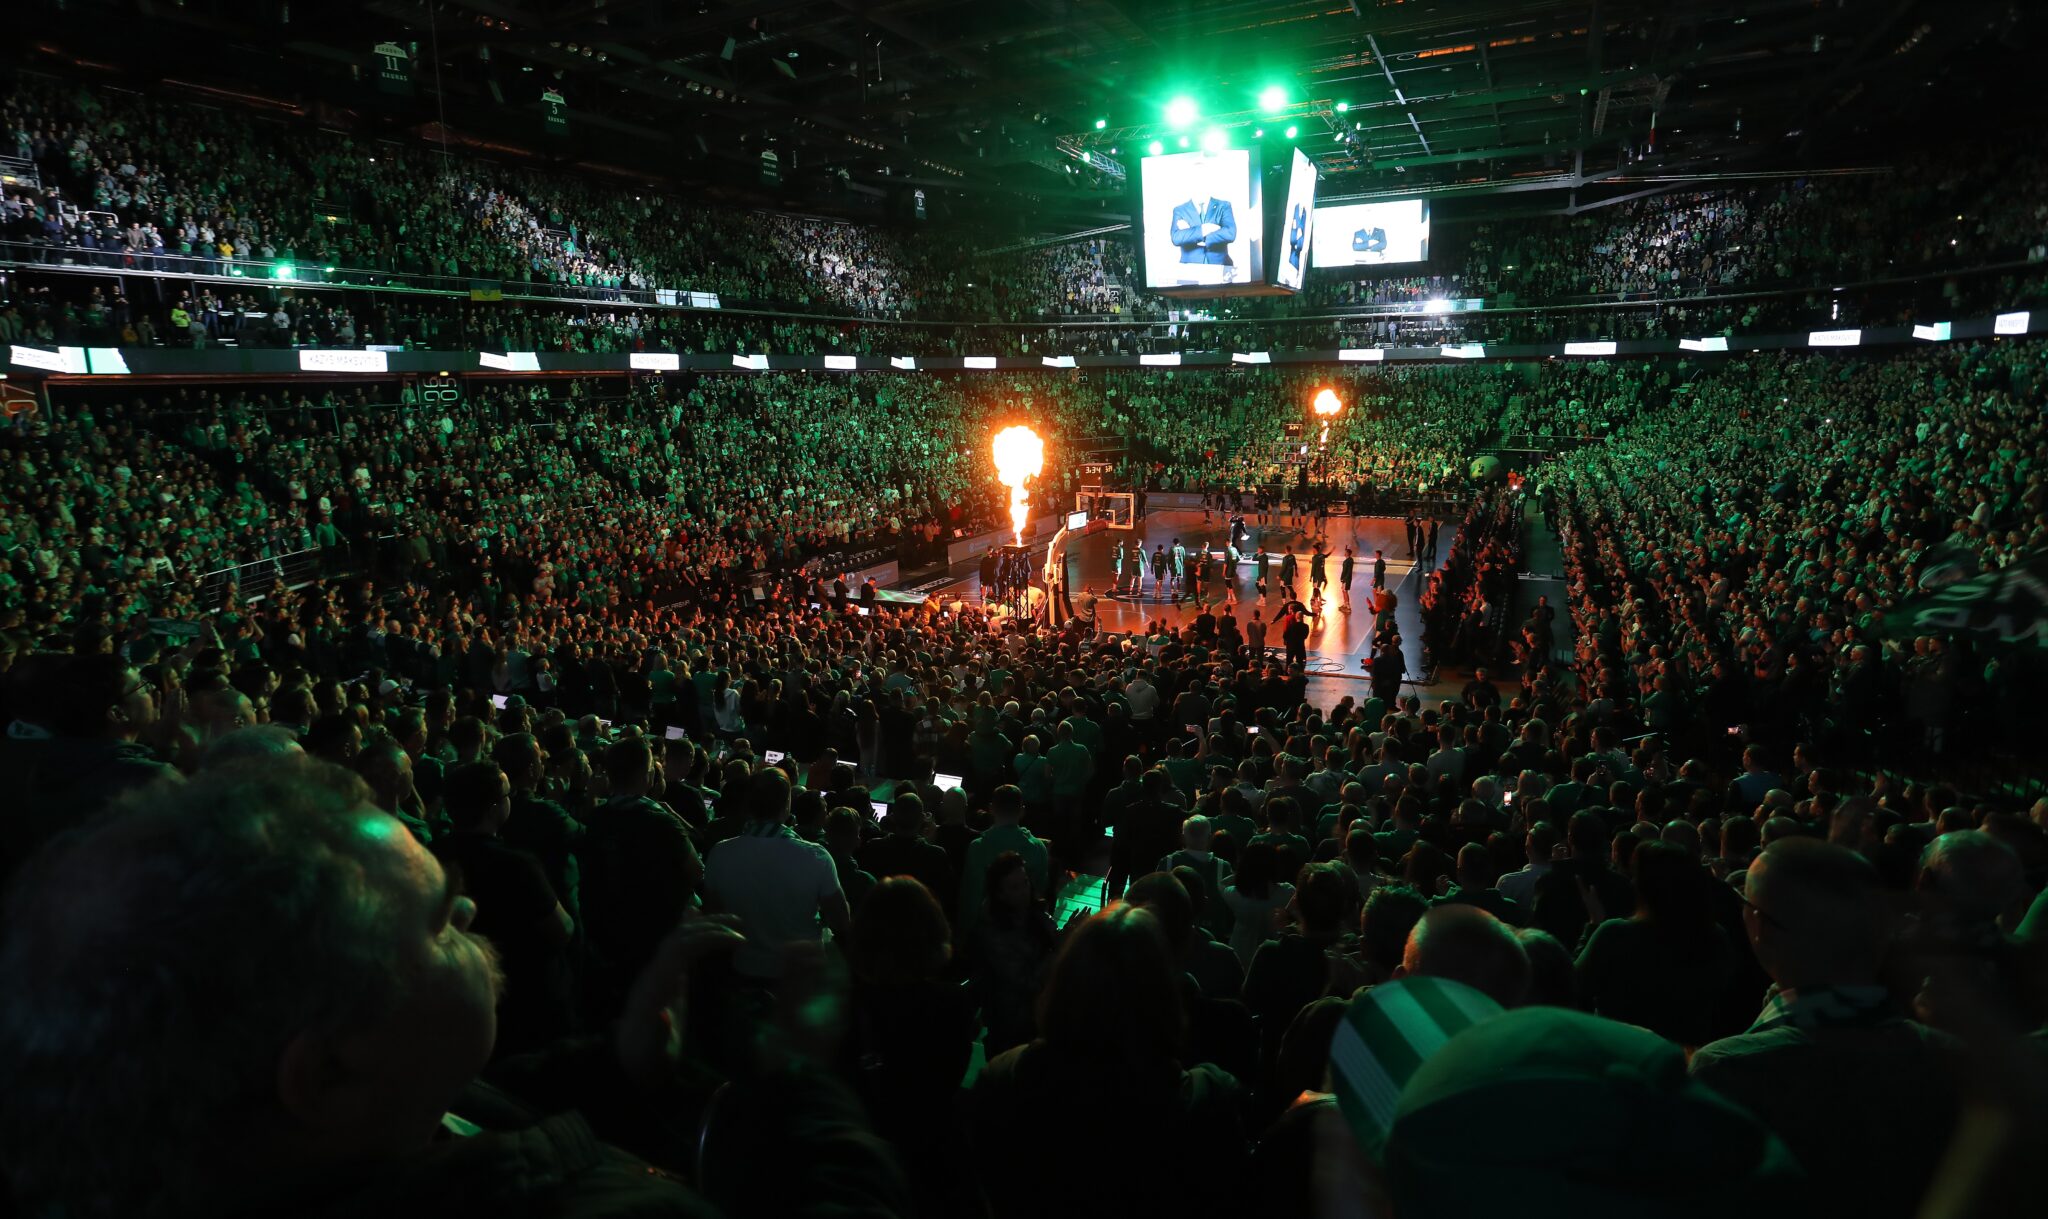 TV3 Group and LRT expand Euroleague broadcasting rights in the Baltics